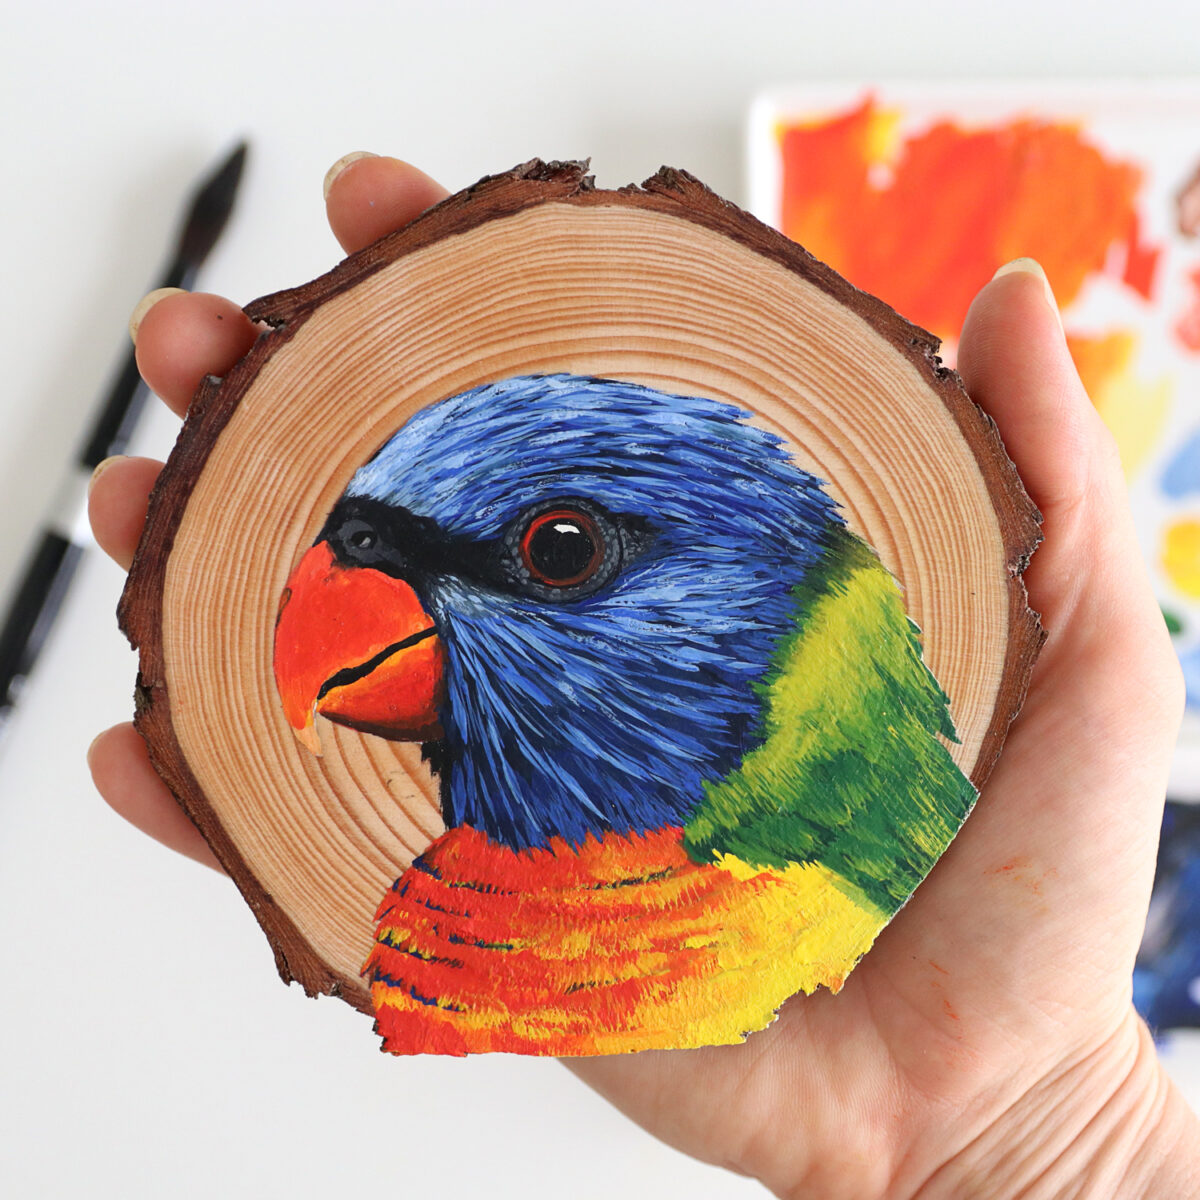 100 Days Of Birds A Marvelous Series Of Gouache On Wood Paintings By Deanna Maree (11)